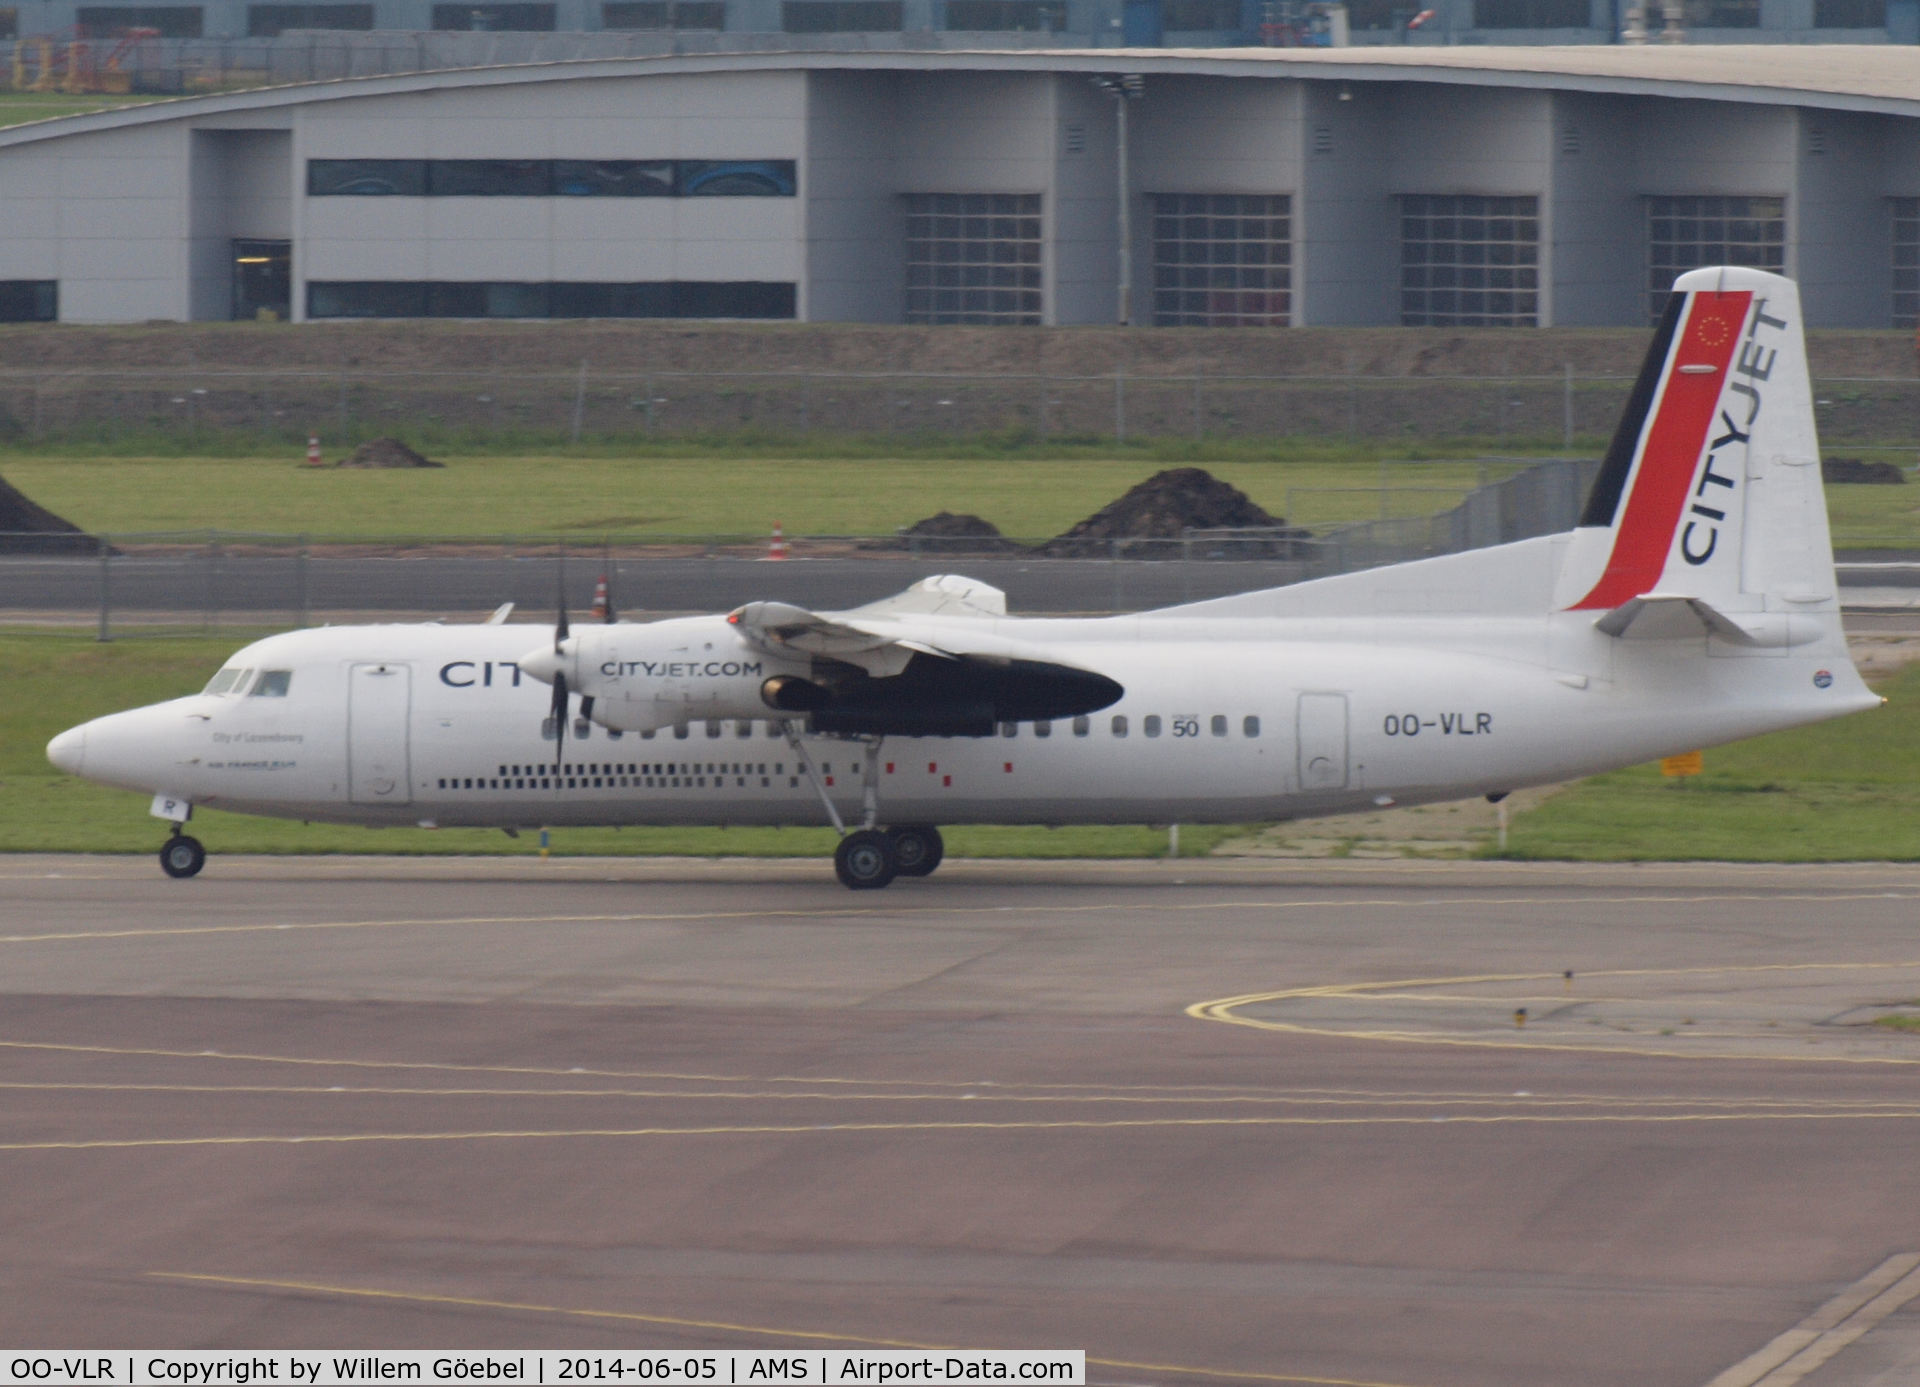 OO-VLR, 1988 Fokker 50 C/N 20121, Taxi to runway L18 of Schiphol Airport